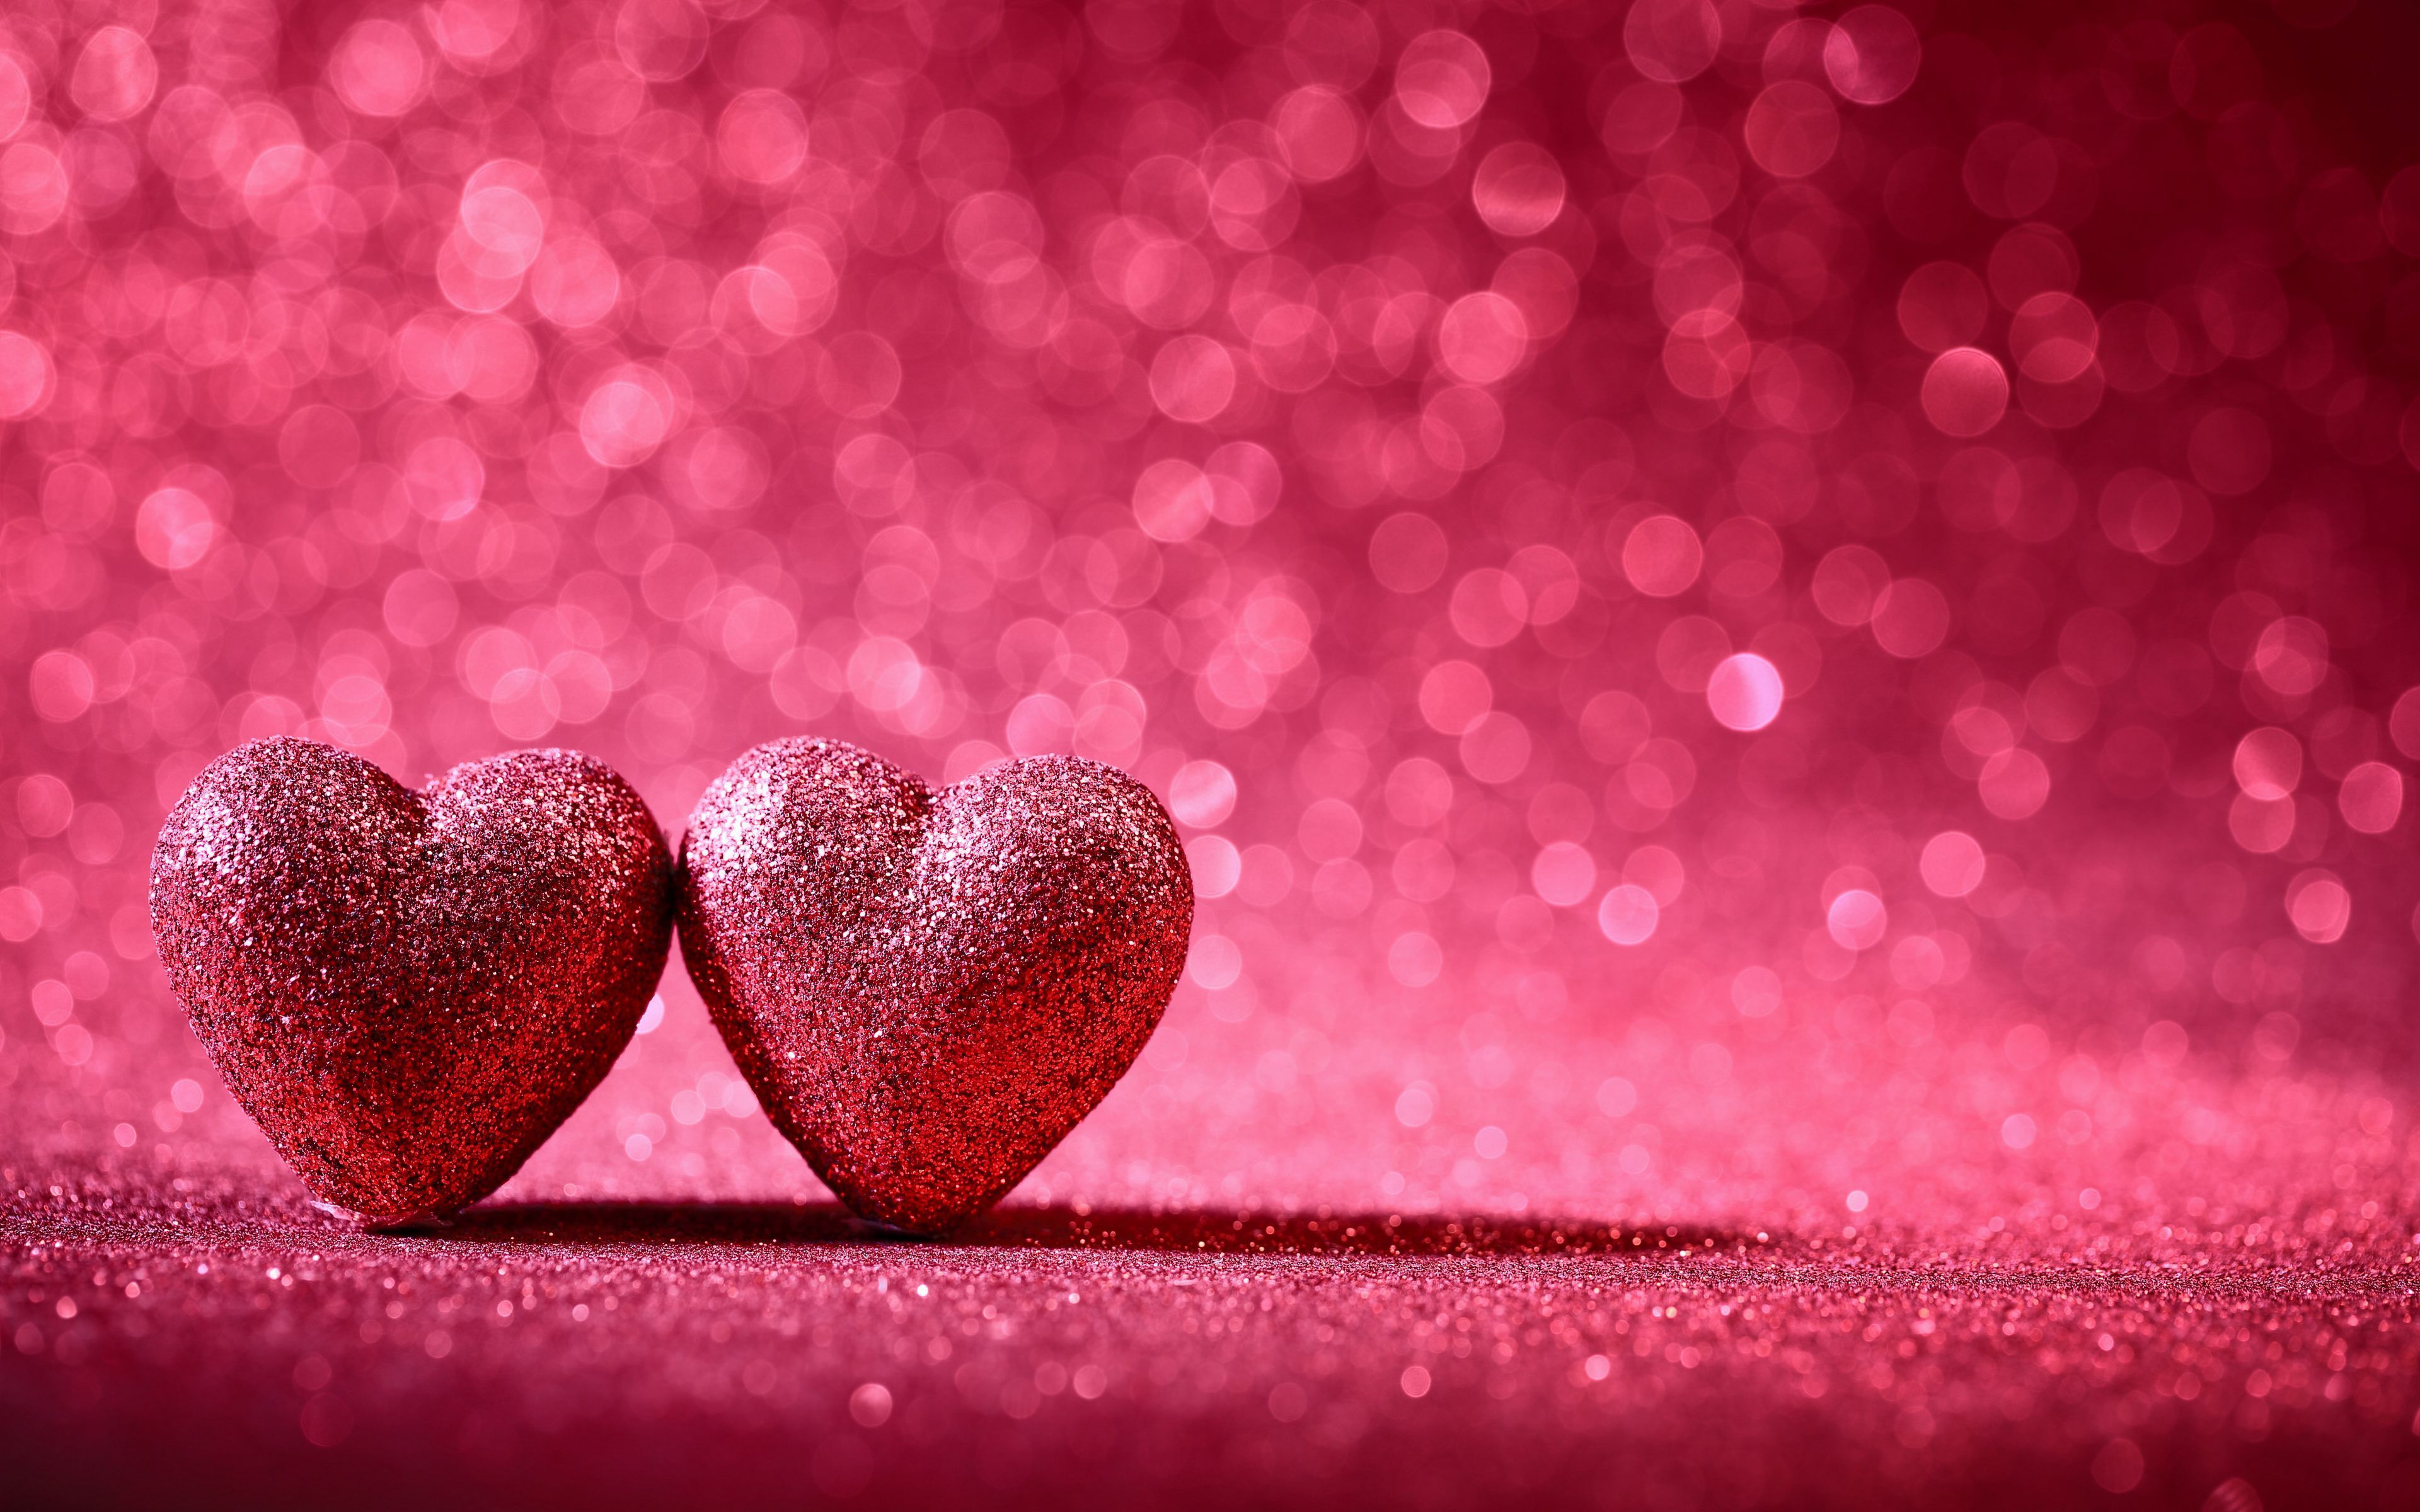 Love You Red Hearts Wallpaper For Desktop in 4K Resolution. Heart wallpaper, Photography backdrops, Birthday photo background